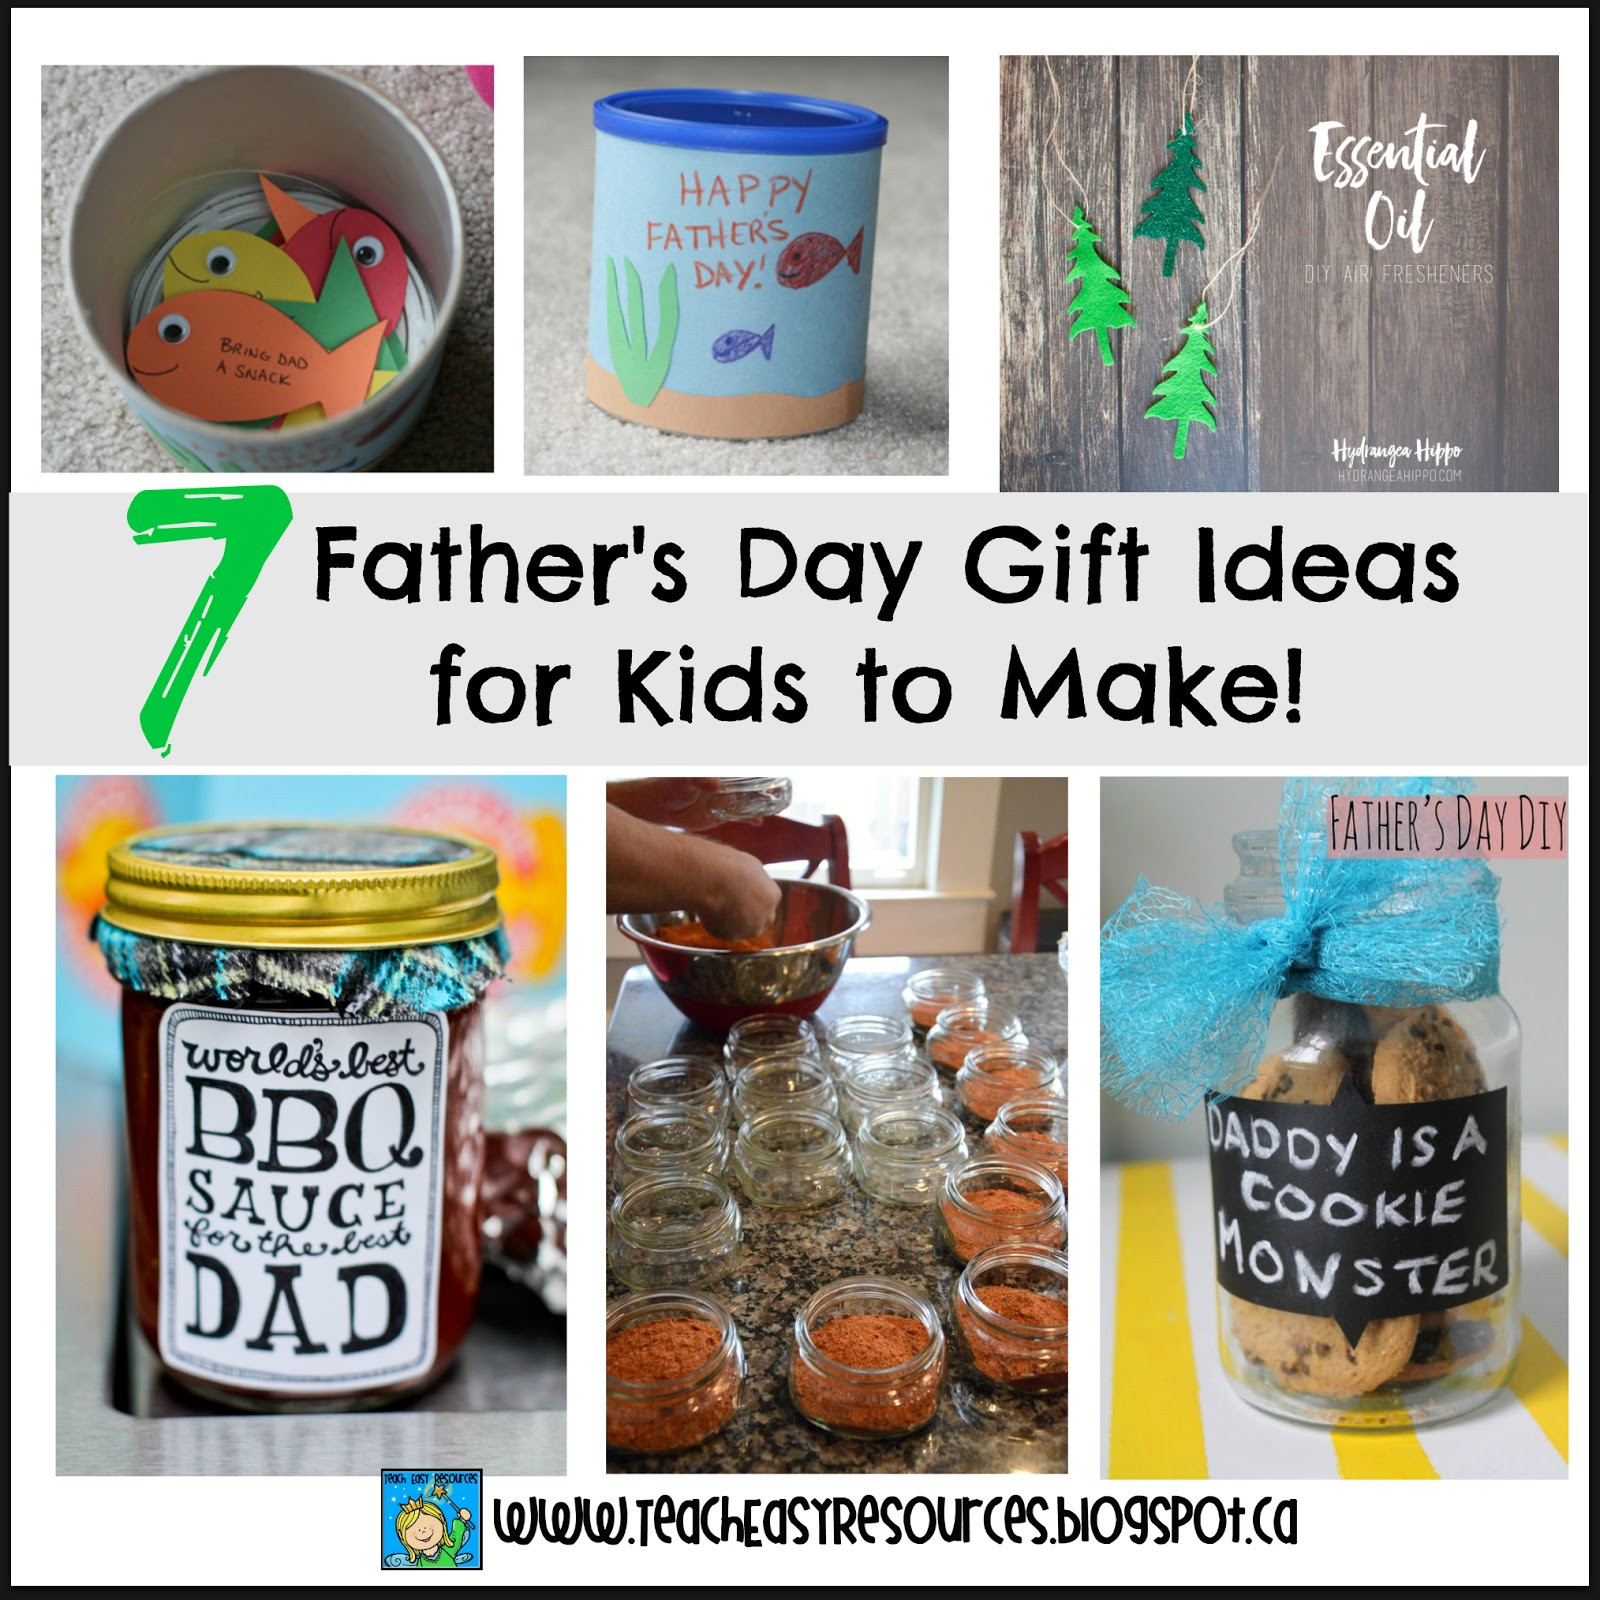 What Are Some Good Fathers Day Gifts
 Teach Easy Resources Father s Day Gift Ideas that Kids